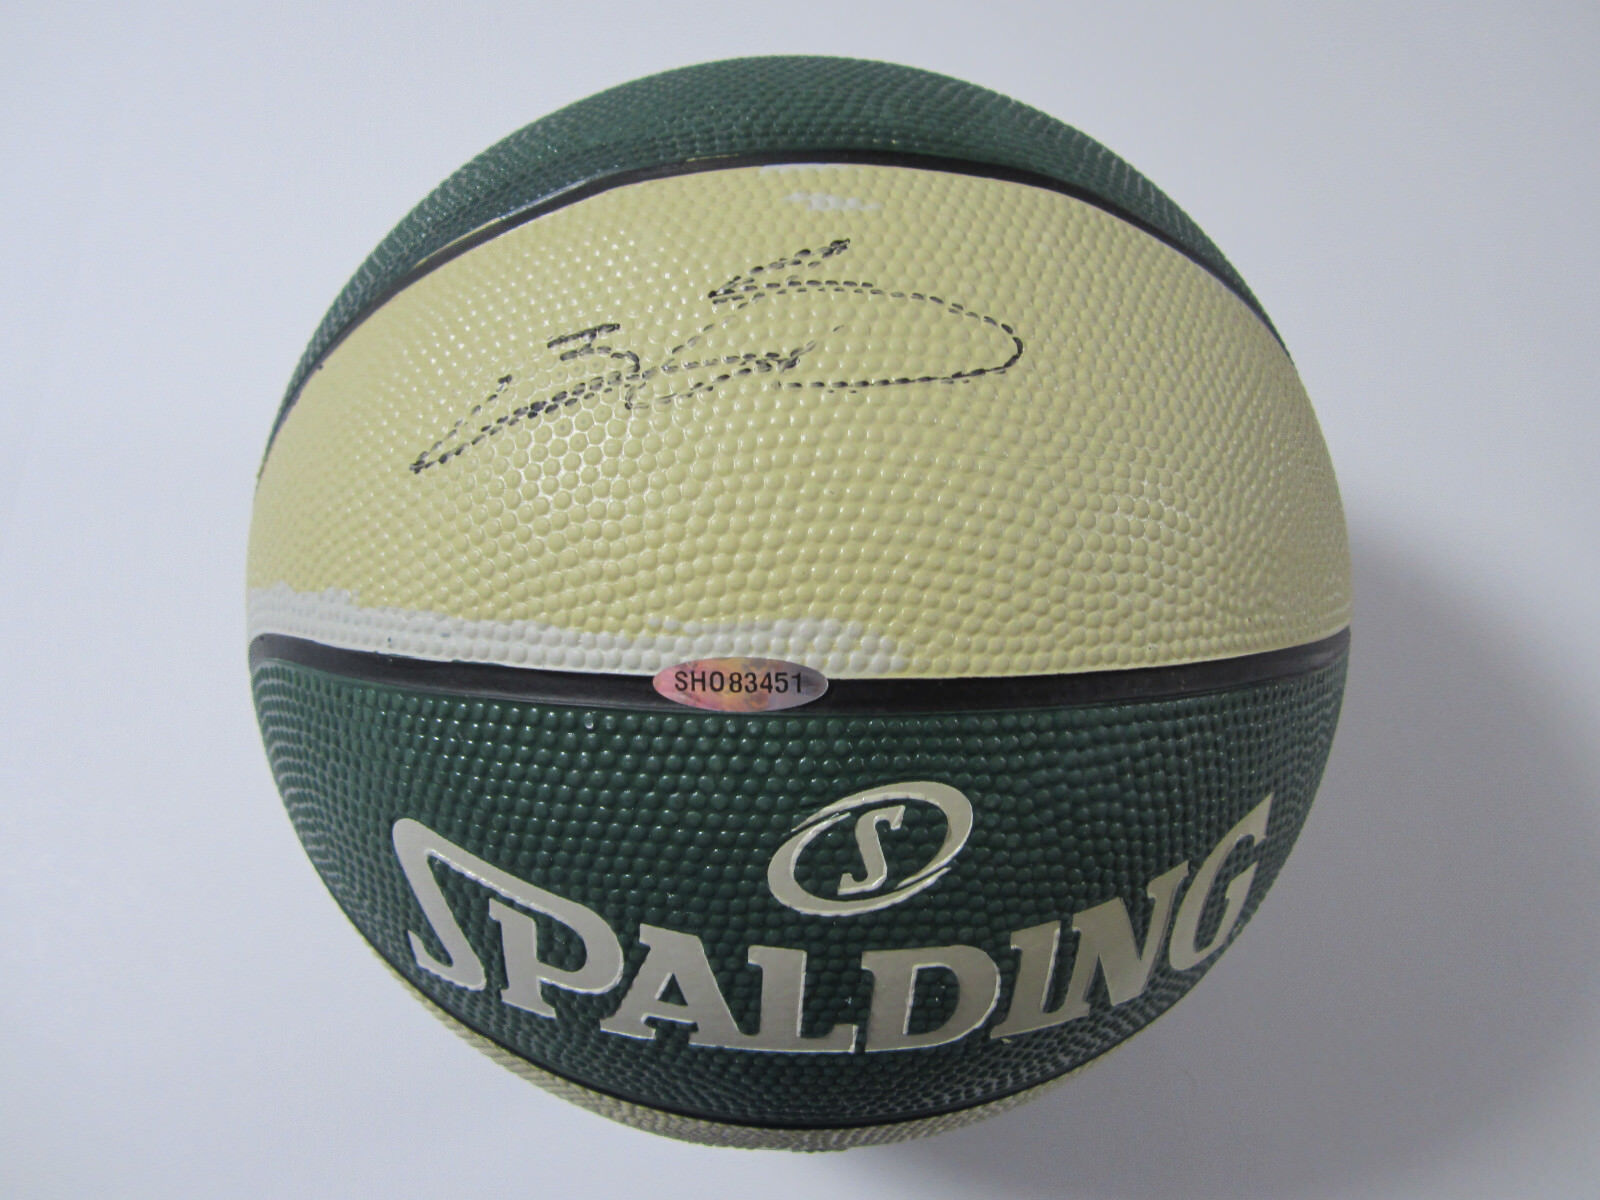 Lebron James Autographed Signed Cleveland Cavaliers 1/1 NBA Green Day 2010 Basketball UDA